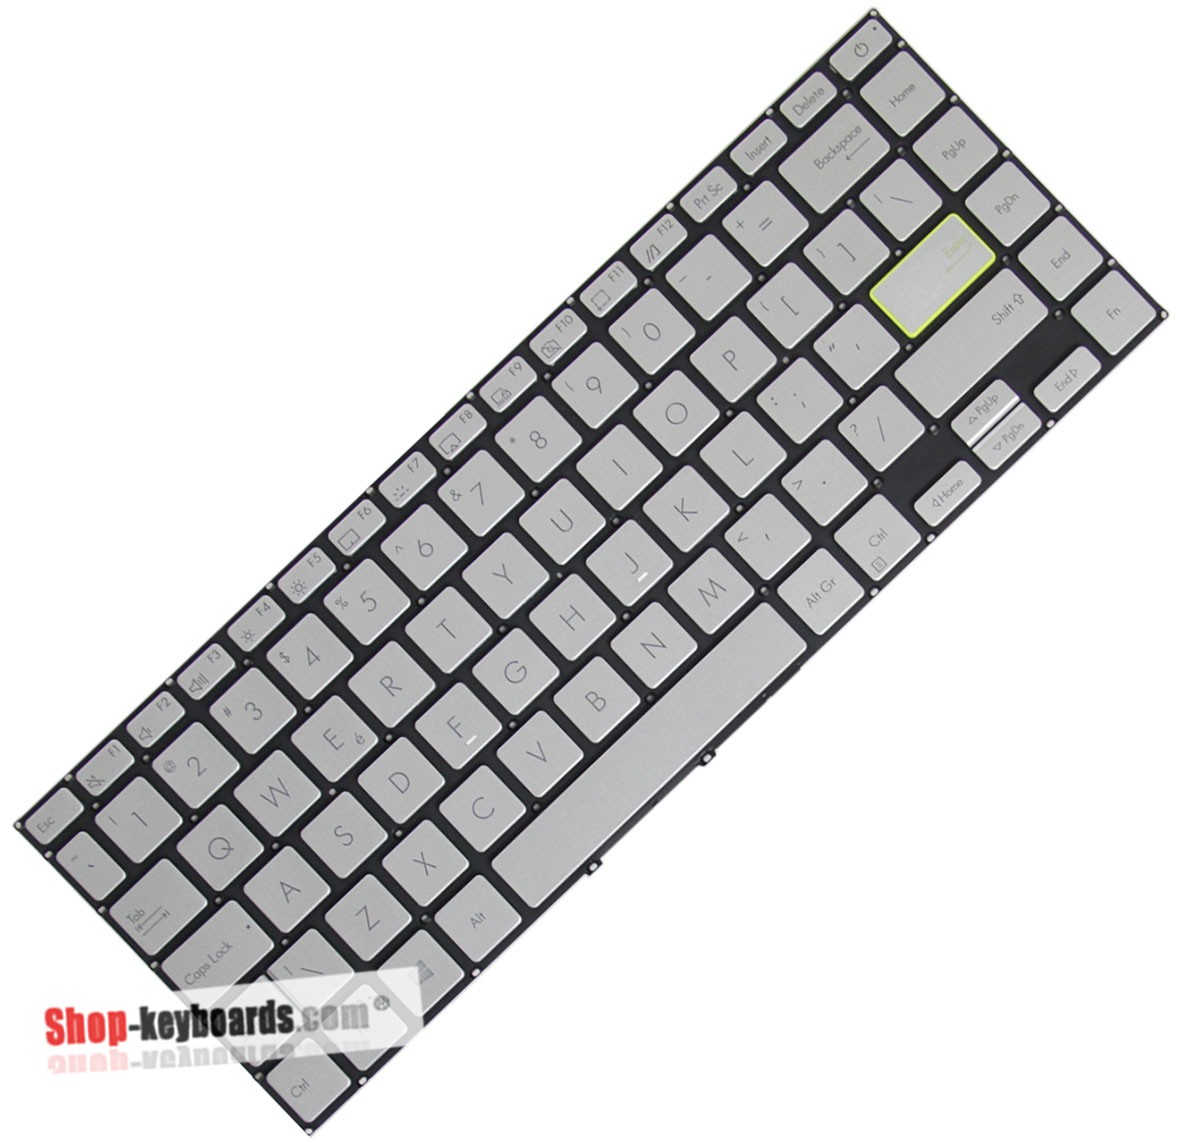 Asus 0KNB0-2820ND00 Keyboard replacement